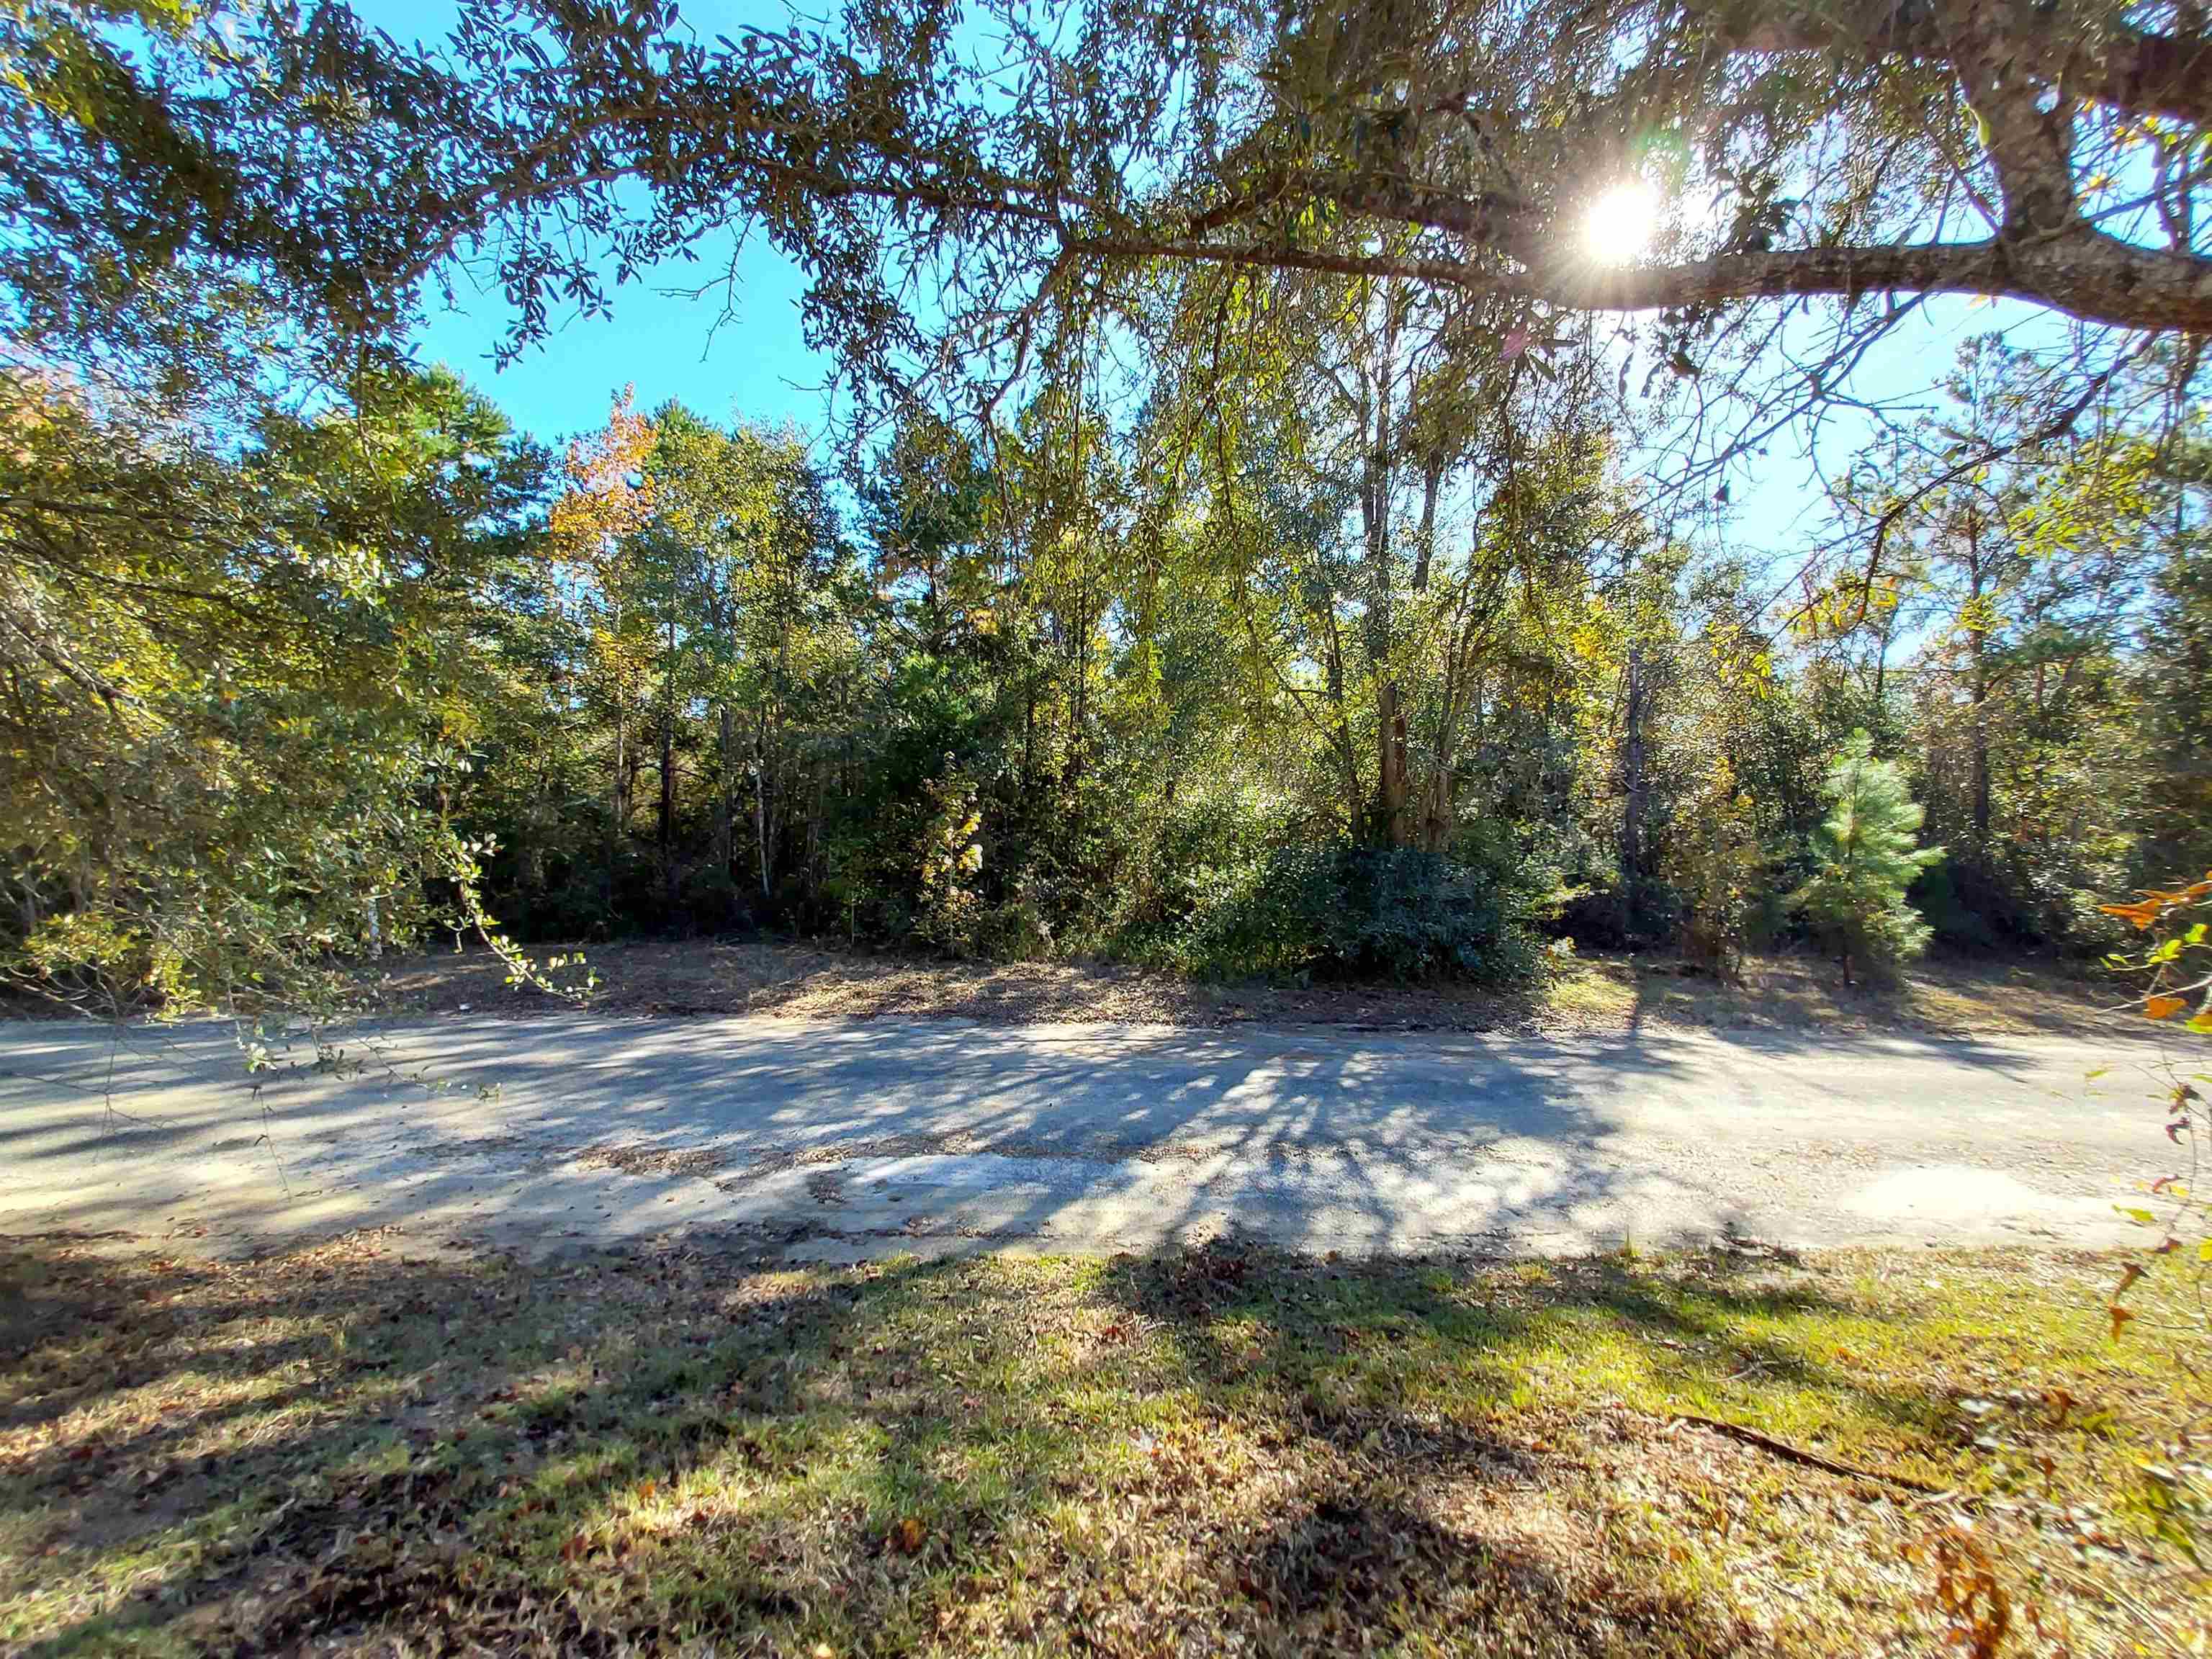 2 Beautiful buildable lots in a newly developing area, less than 3 miles north of the Courthouse.  These 2 lots, totaling over an acre are beautifully woods, back up to a large residential parcel.  These lots are located on a paved, curbed and guttered street.  There will be no drive through traffic on this cul-de-sac street.  This is a perfect place to build your new home along side the other new construction homes.